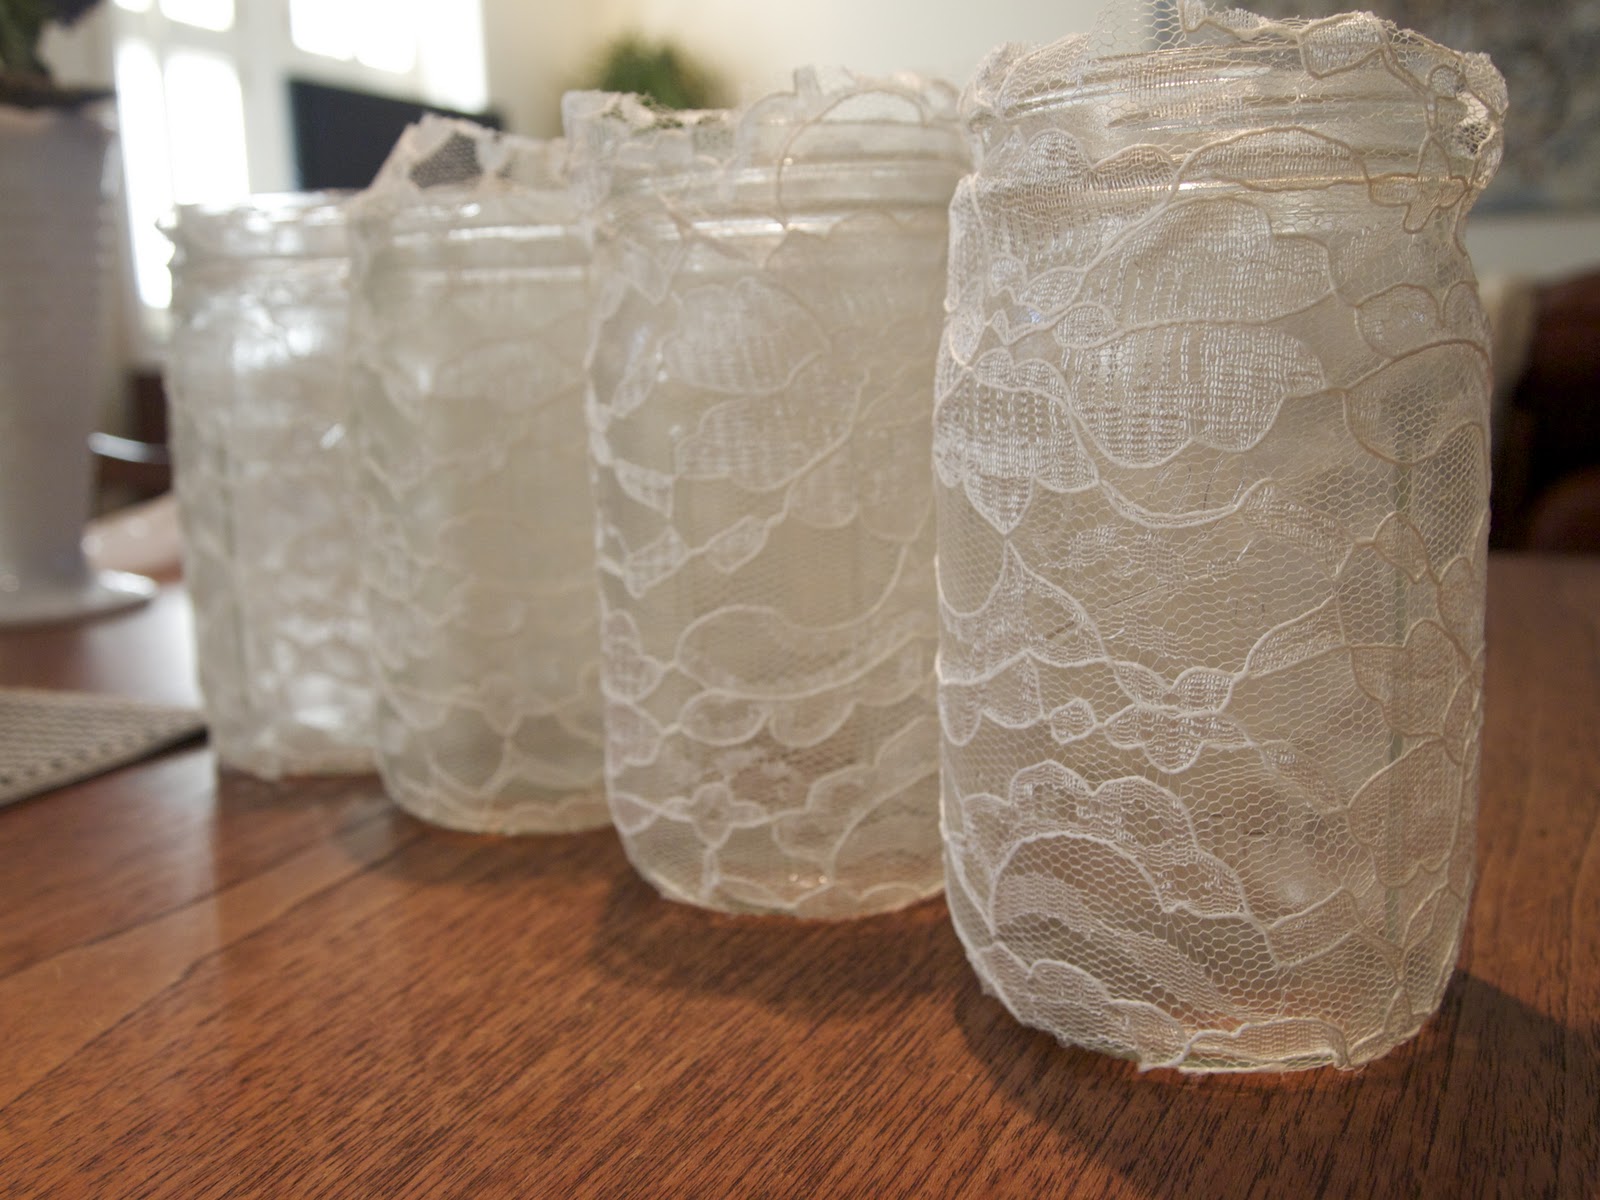 How to Make Burlap and Lace Mason Jars - Adventures of a 